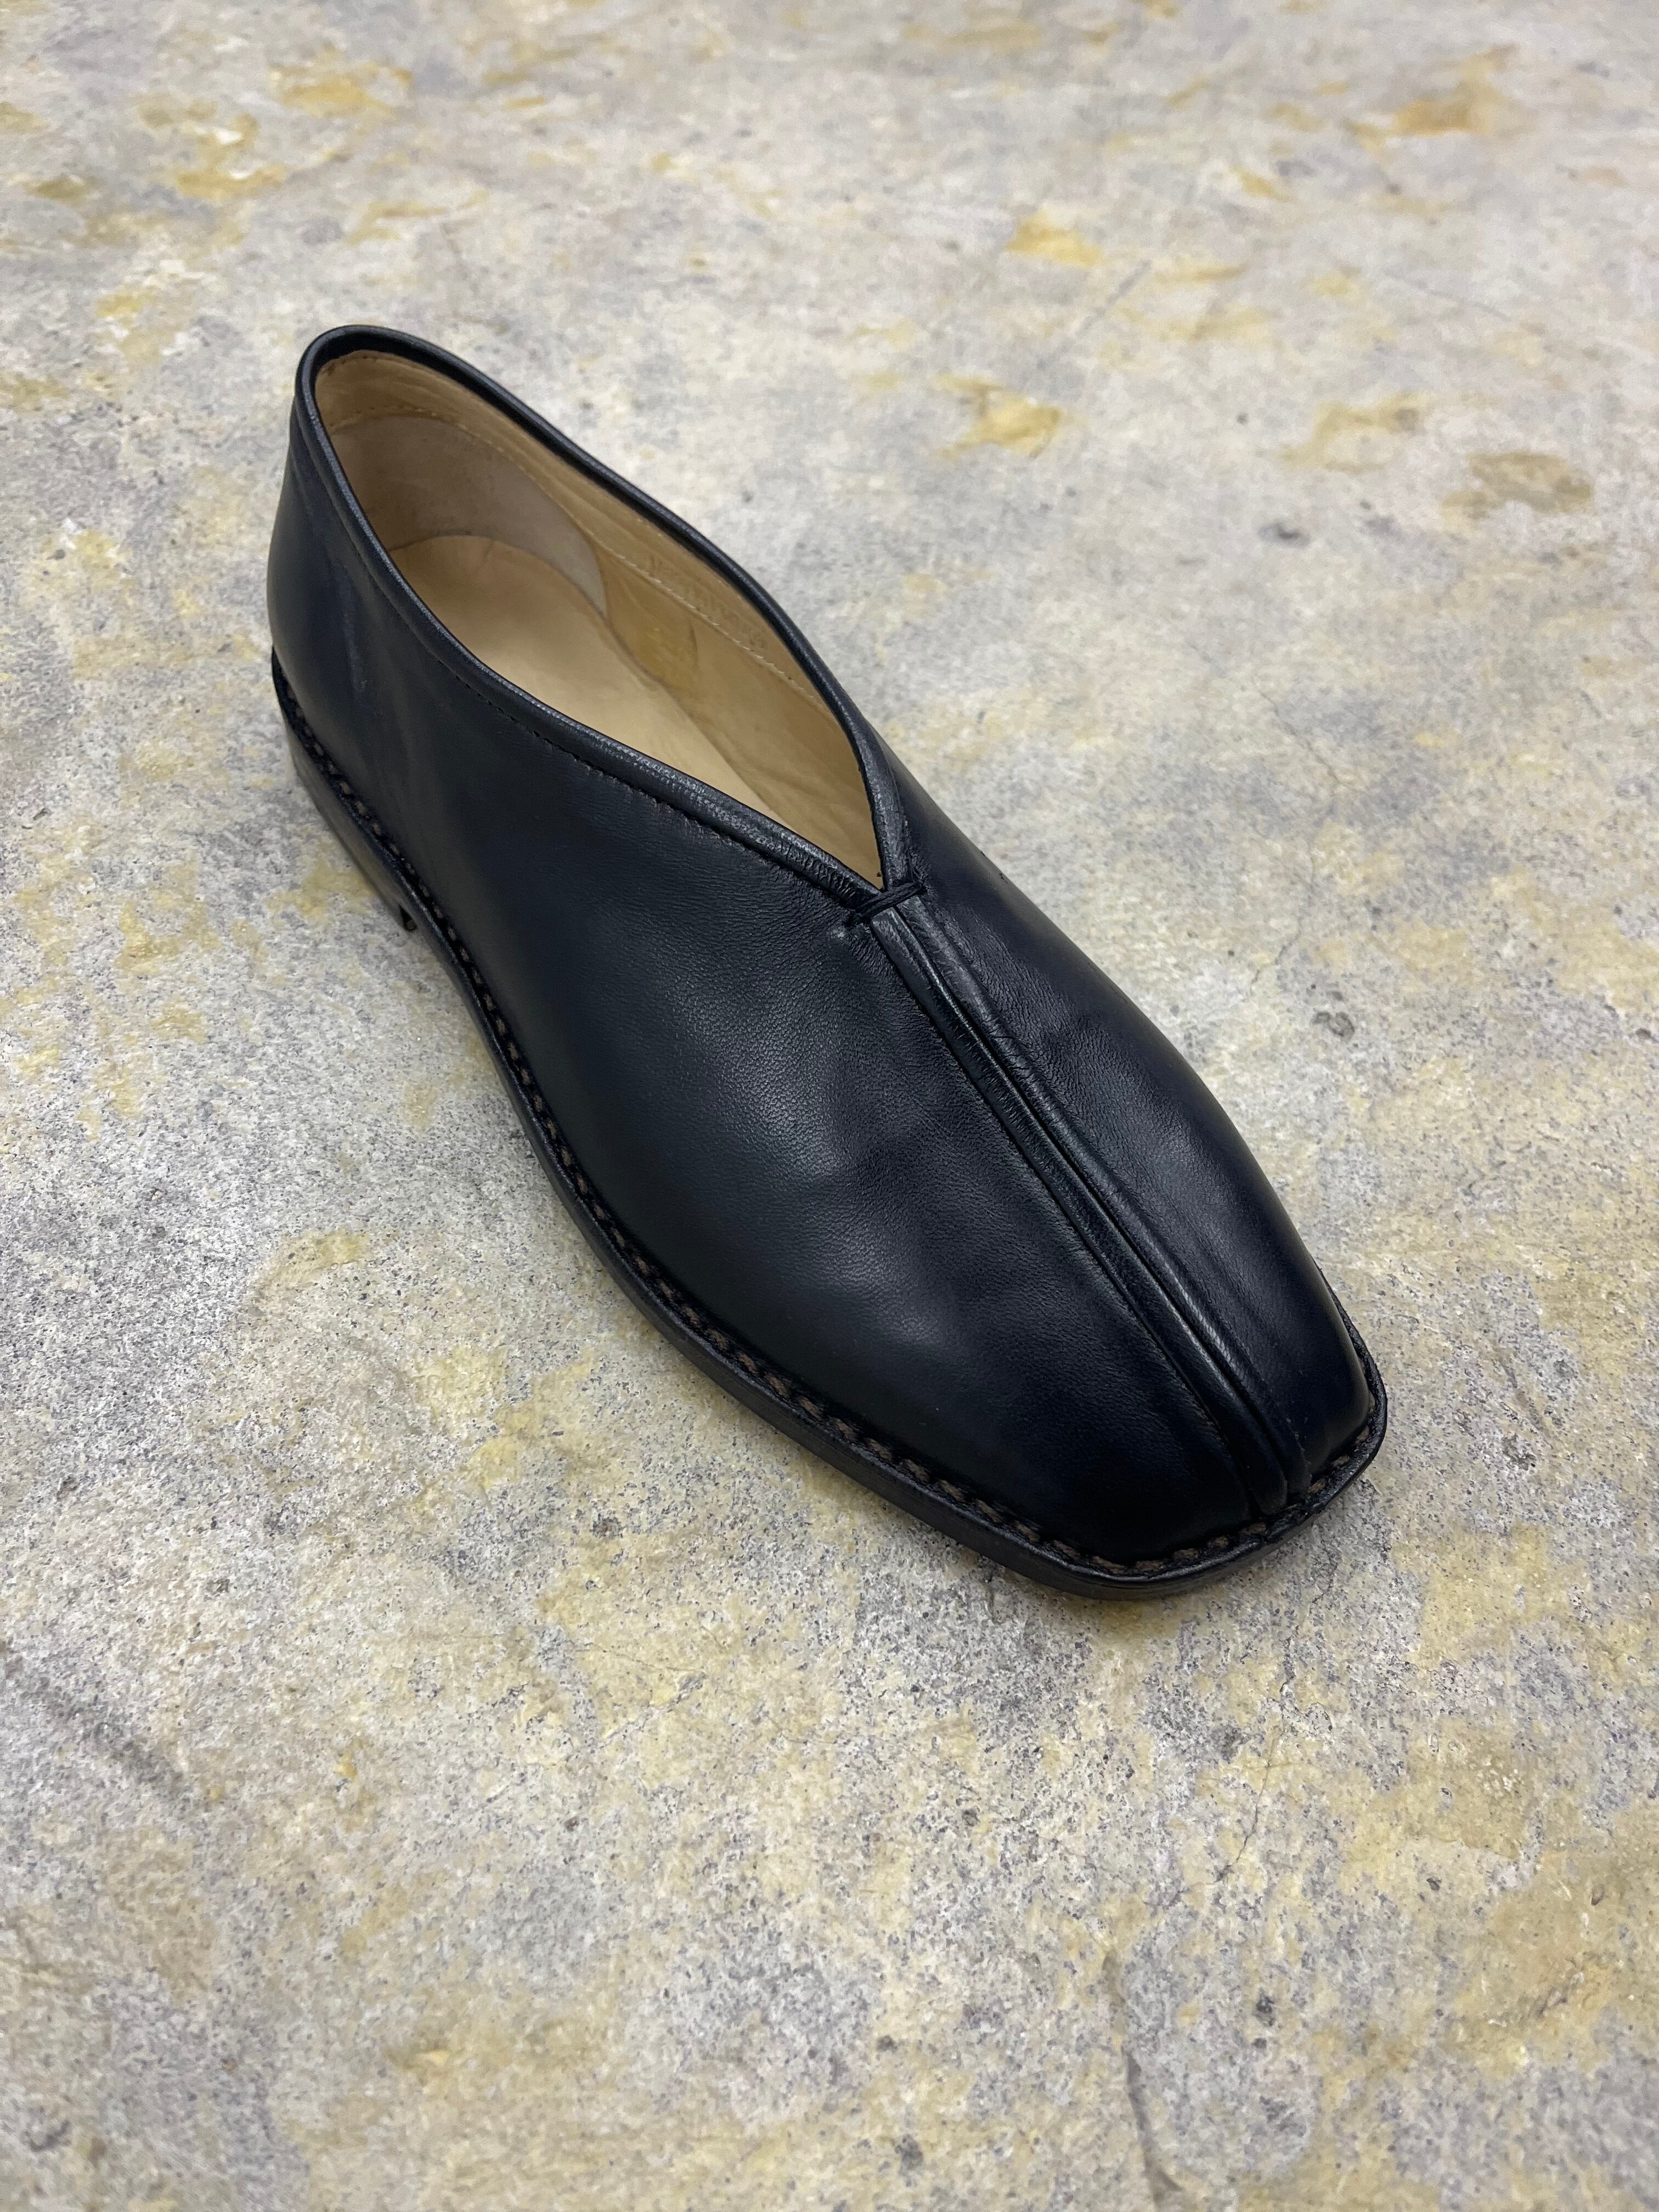 LEMAIRE PIPED SLIPPERS BLACK - ドレス/ビジネス